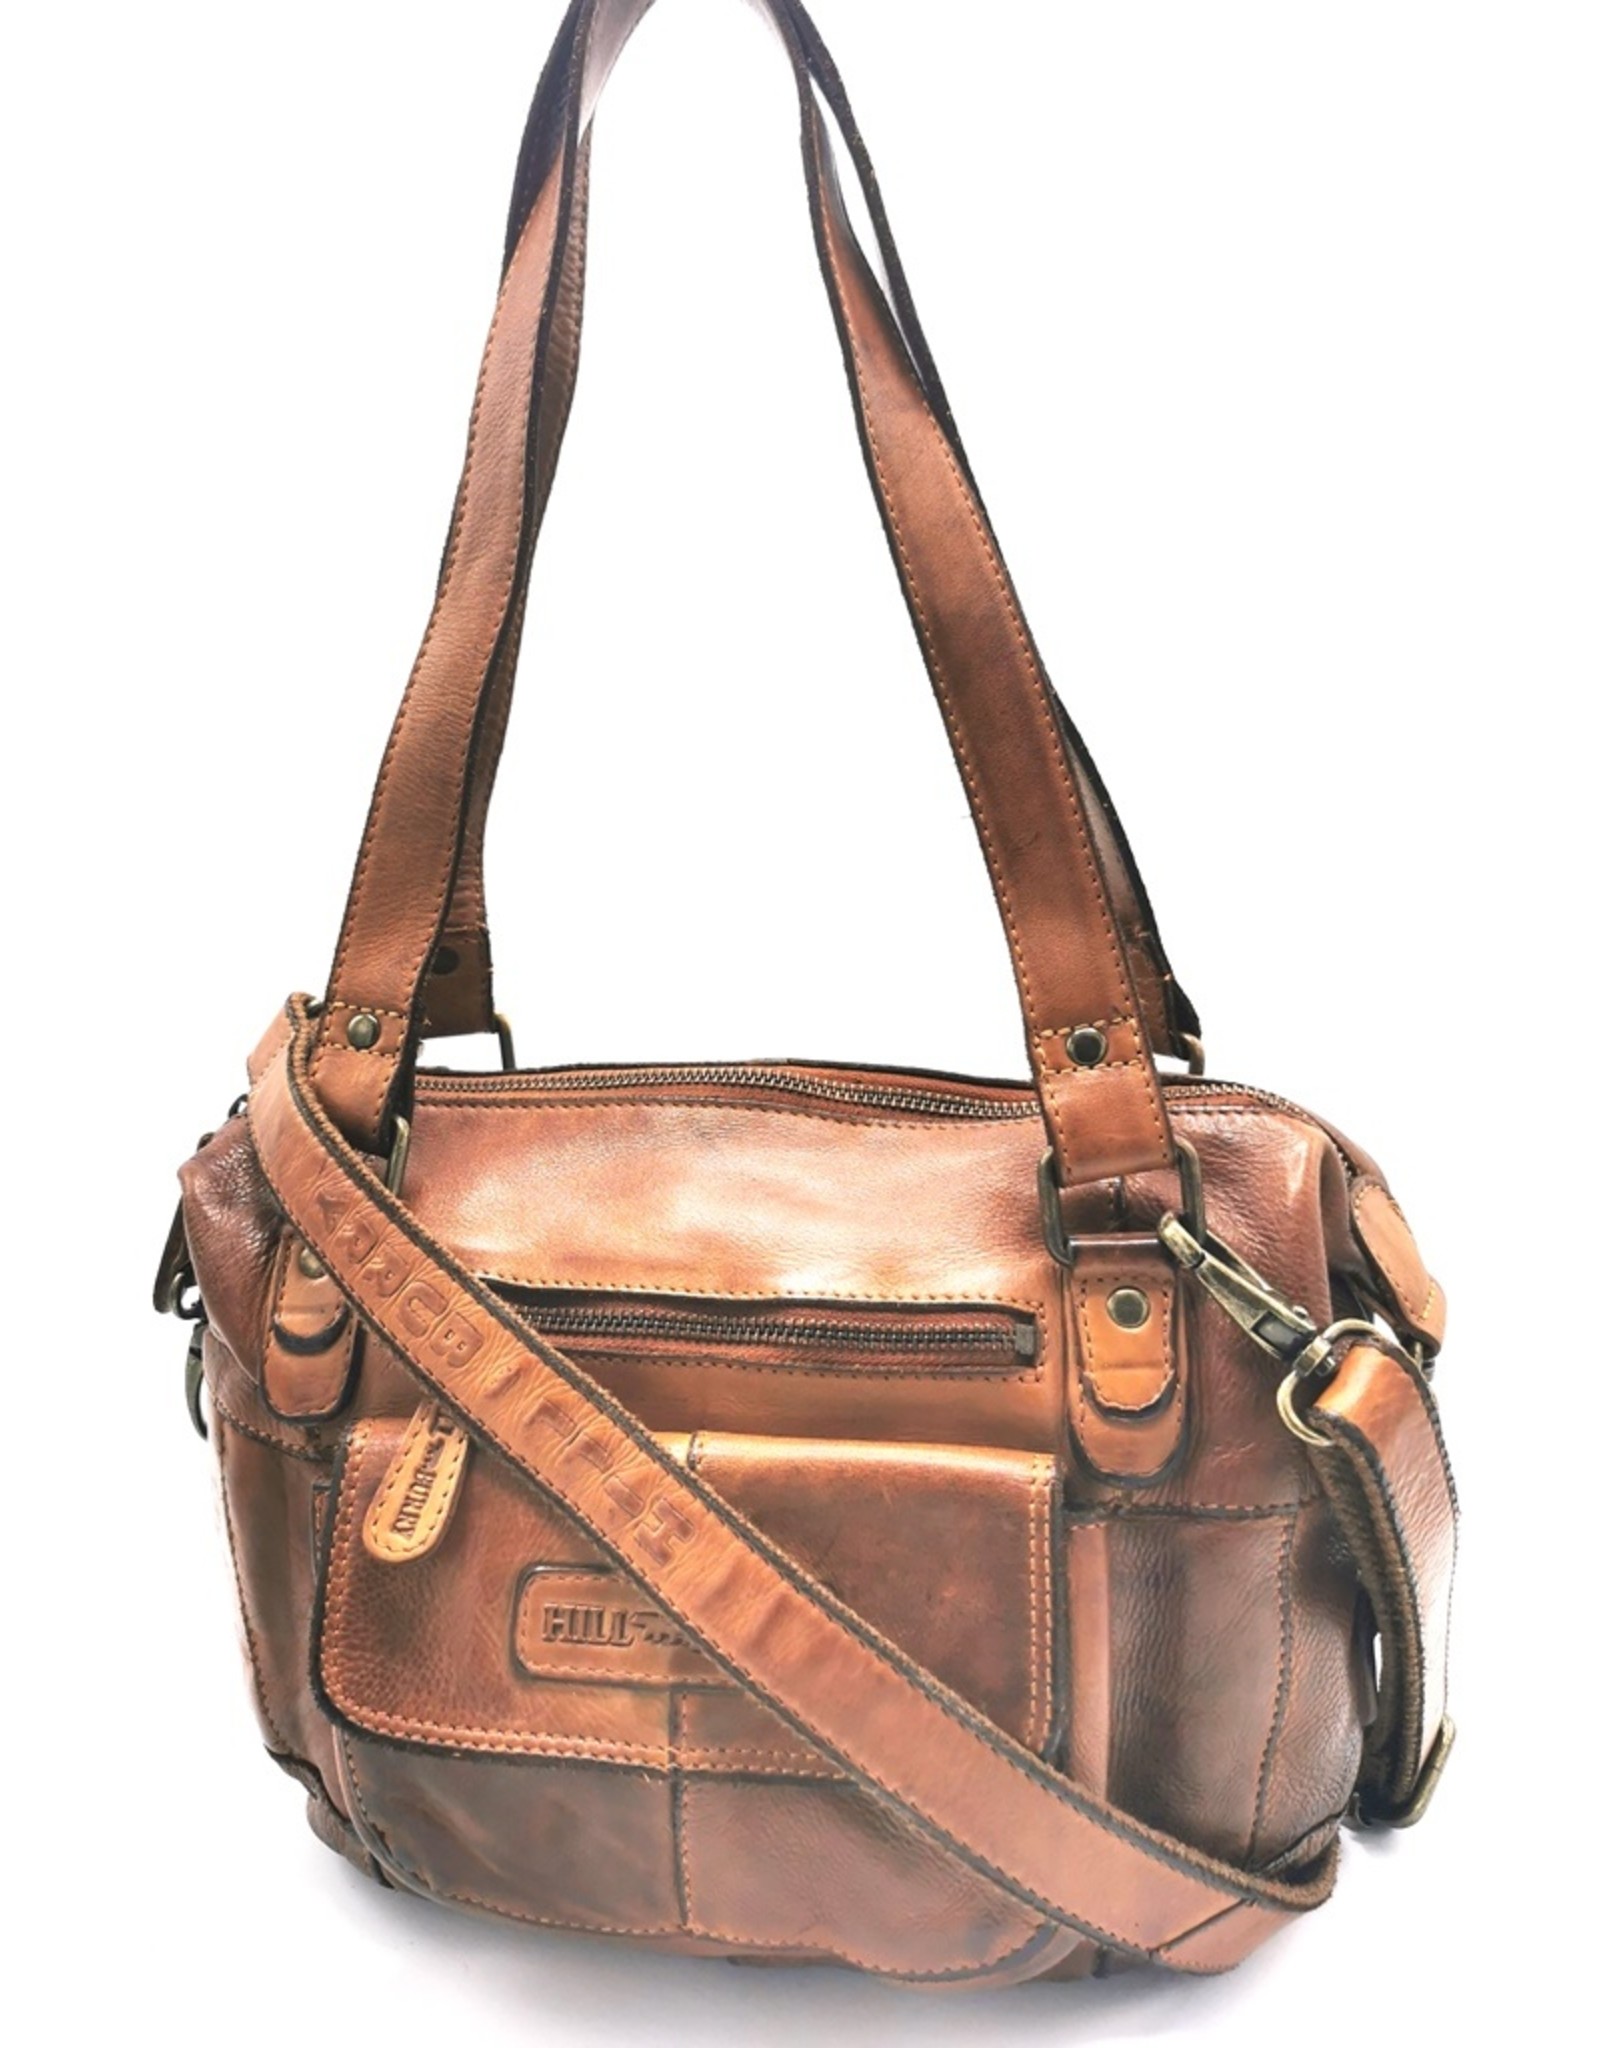 HillBurry Leather Shoulder bags  leather crossbody bags - HillBurry Shoulder Bag Washed Leather cognac (tan)